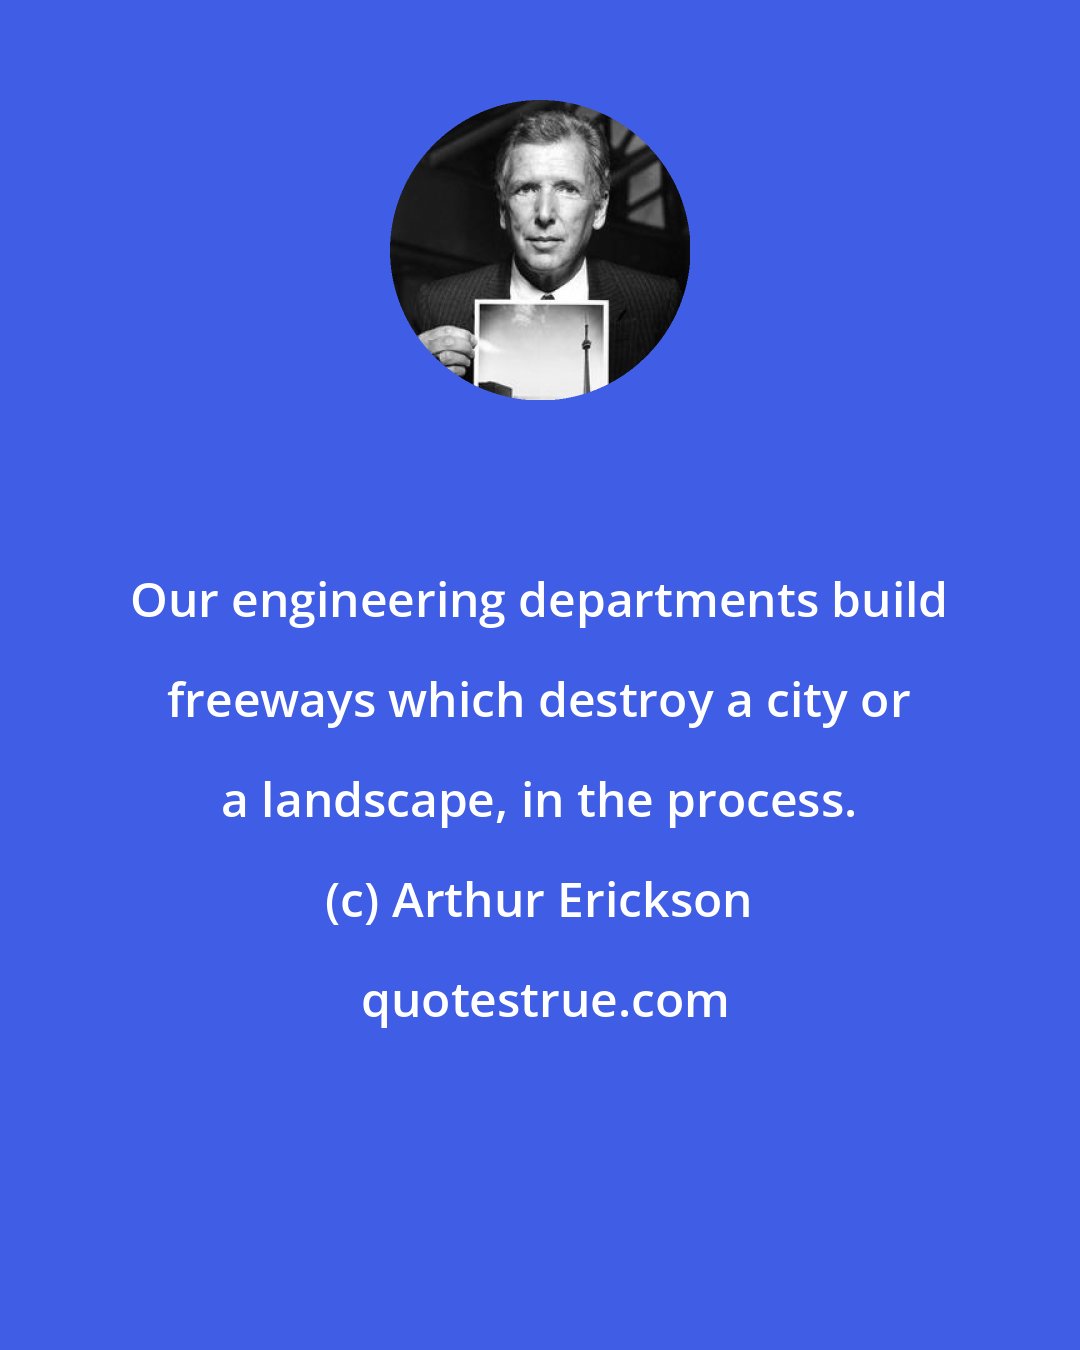 Arthur Erickson: Our engineering departments build freeways which destroy a city or a landscape, in the process.